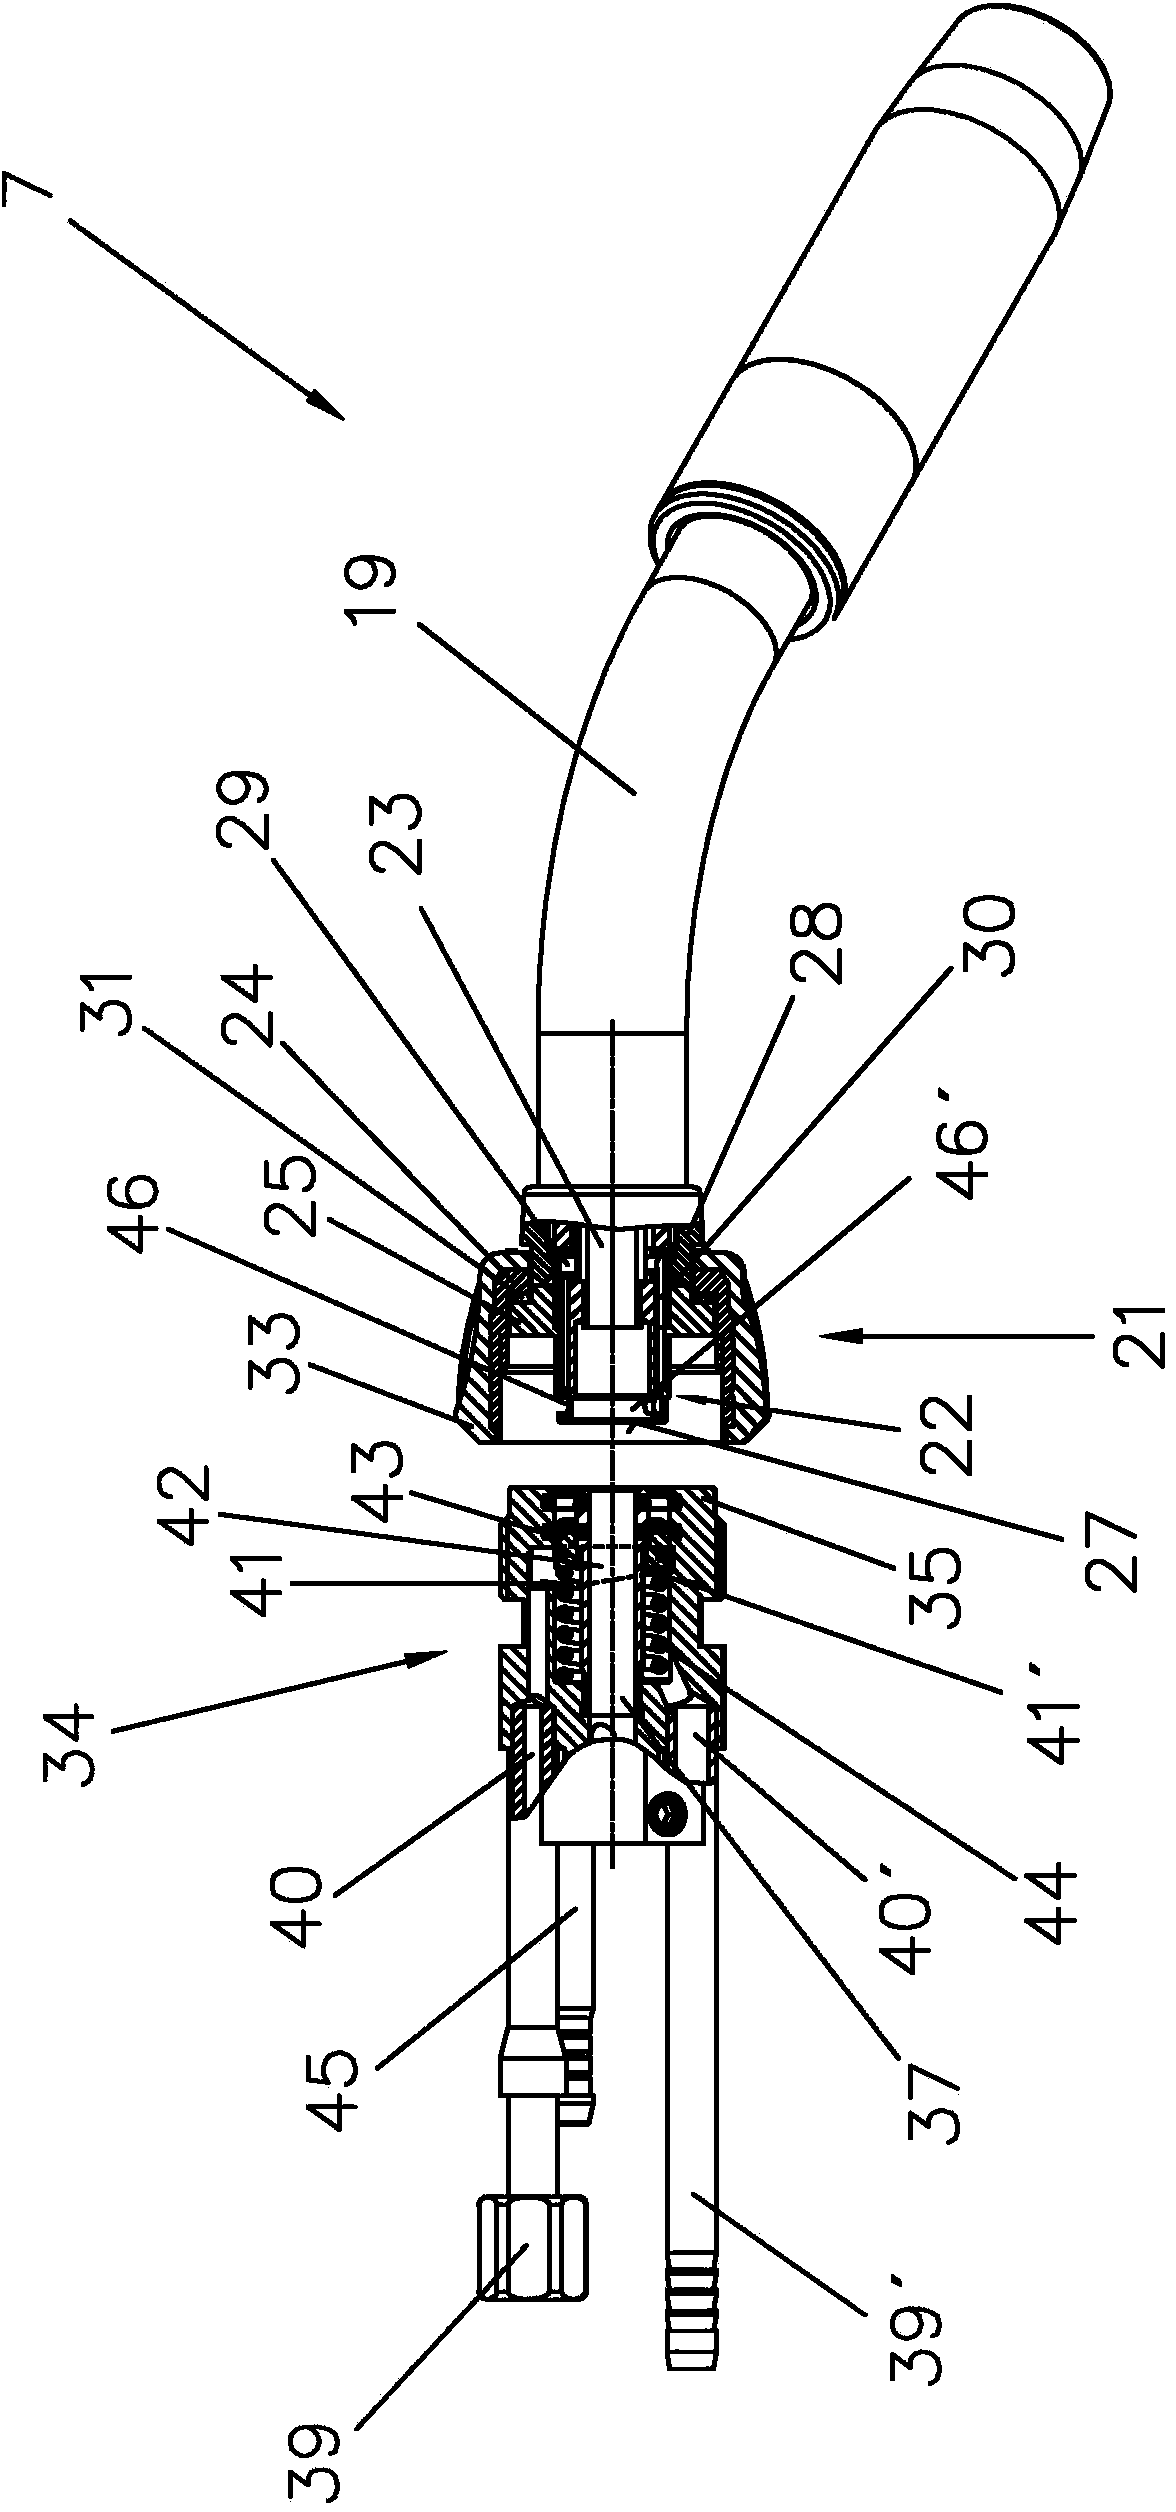 Plug part and socket part for detachably connecting pipe elbow of water-cooled welding torch and connecting device